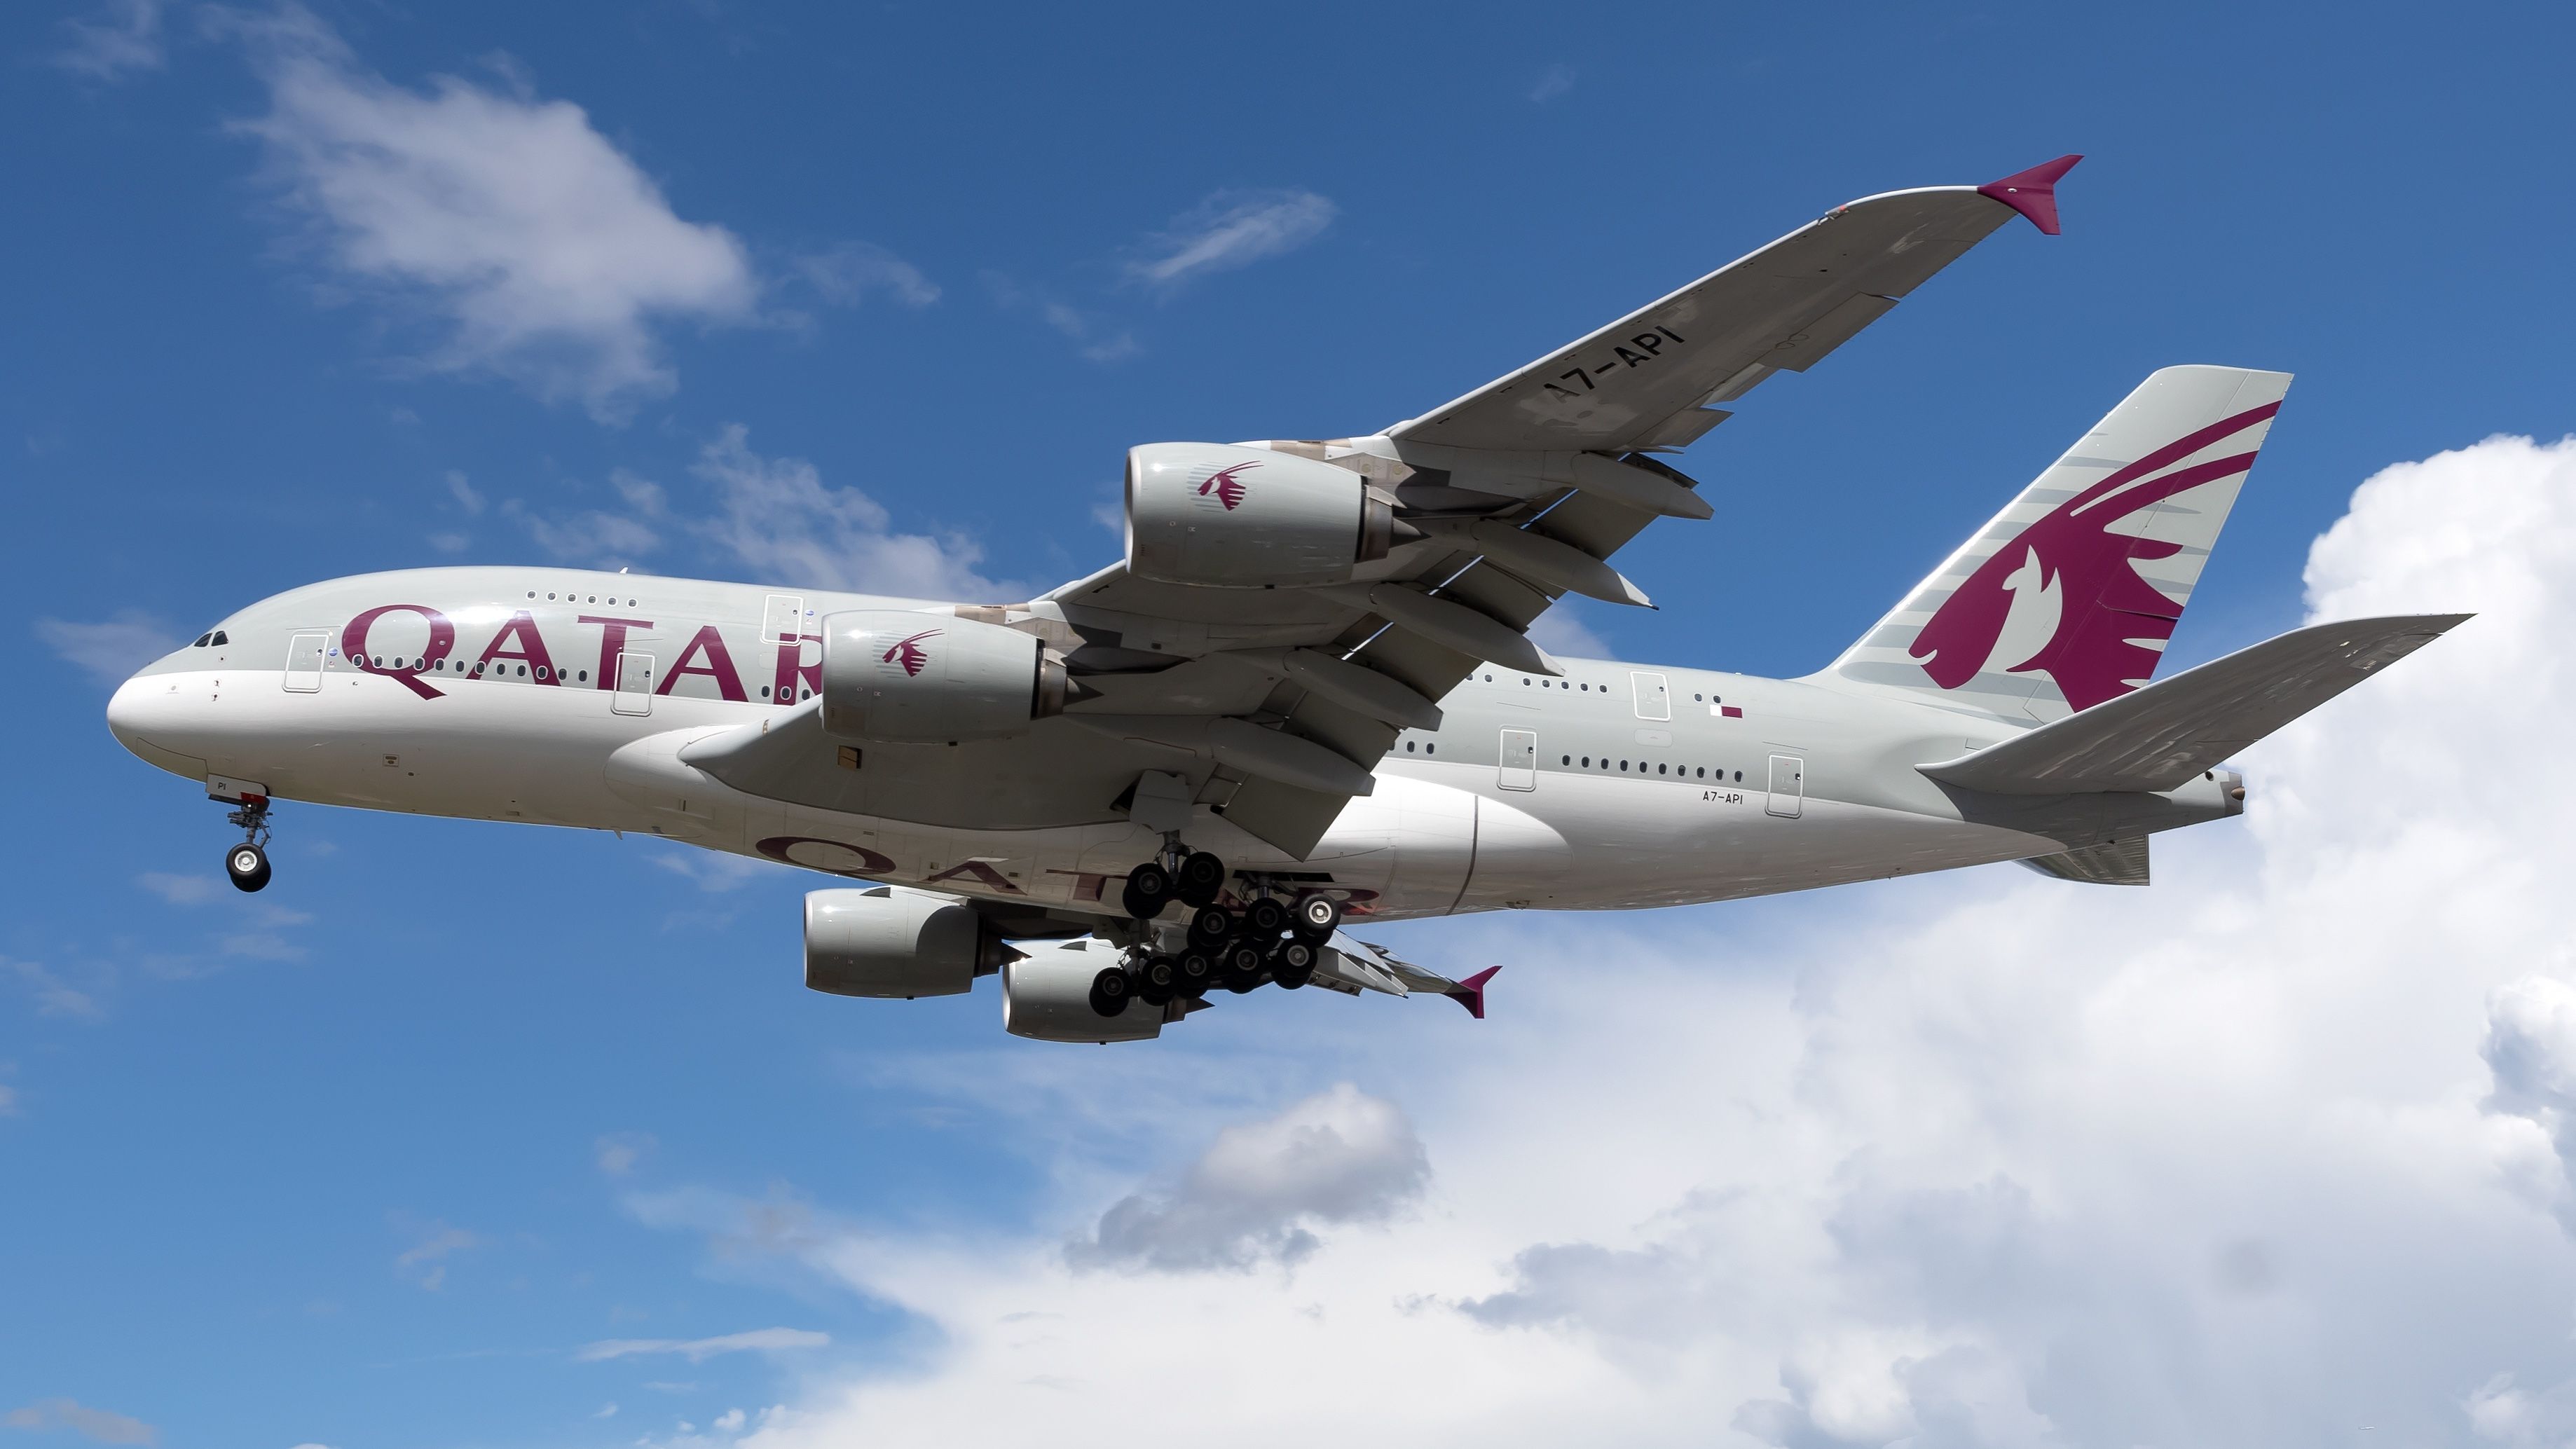 White Airbus A380 jetliner with Qatar in purple lettering on the side flying through blue sky and clouds